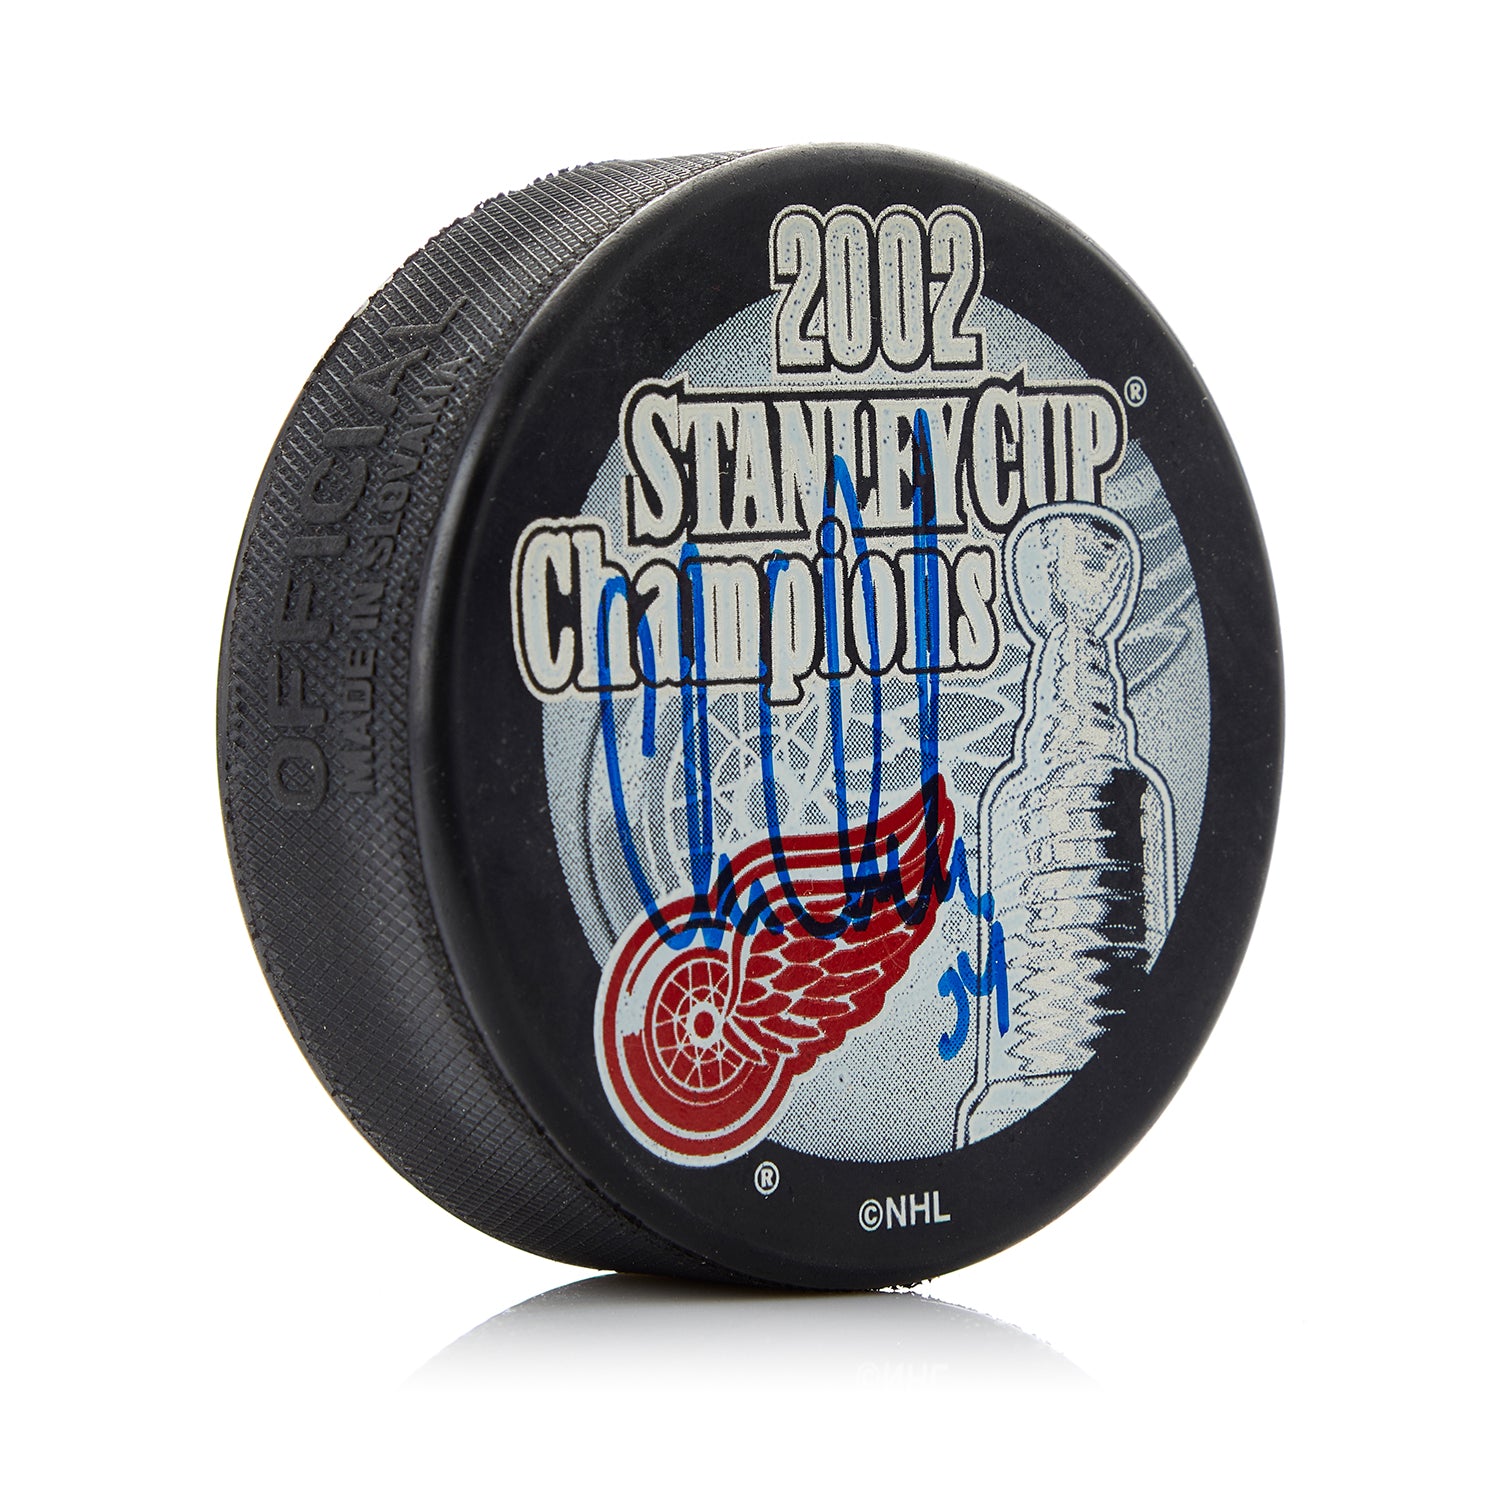 Chris Chelios Detroit Red Wings Autographed 2002 Stanley Cup Puck